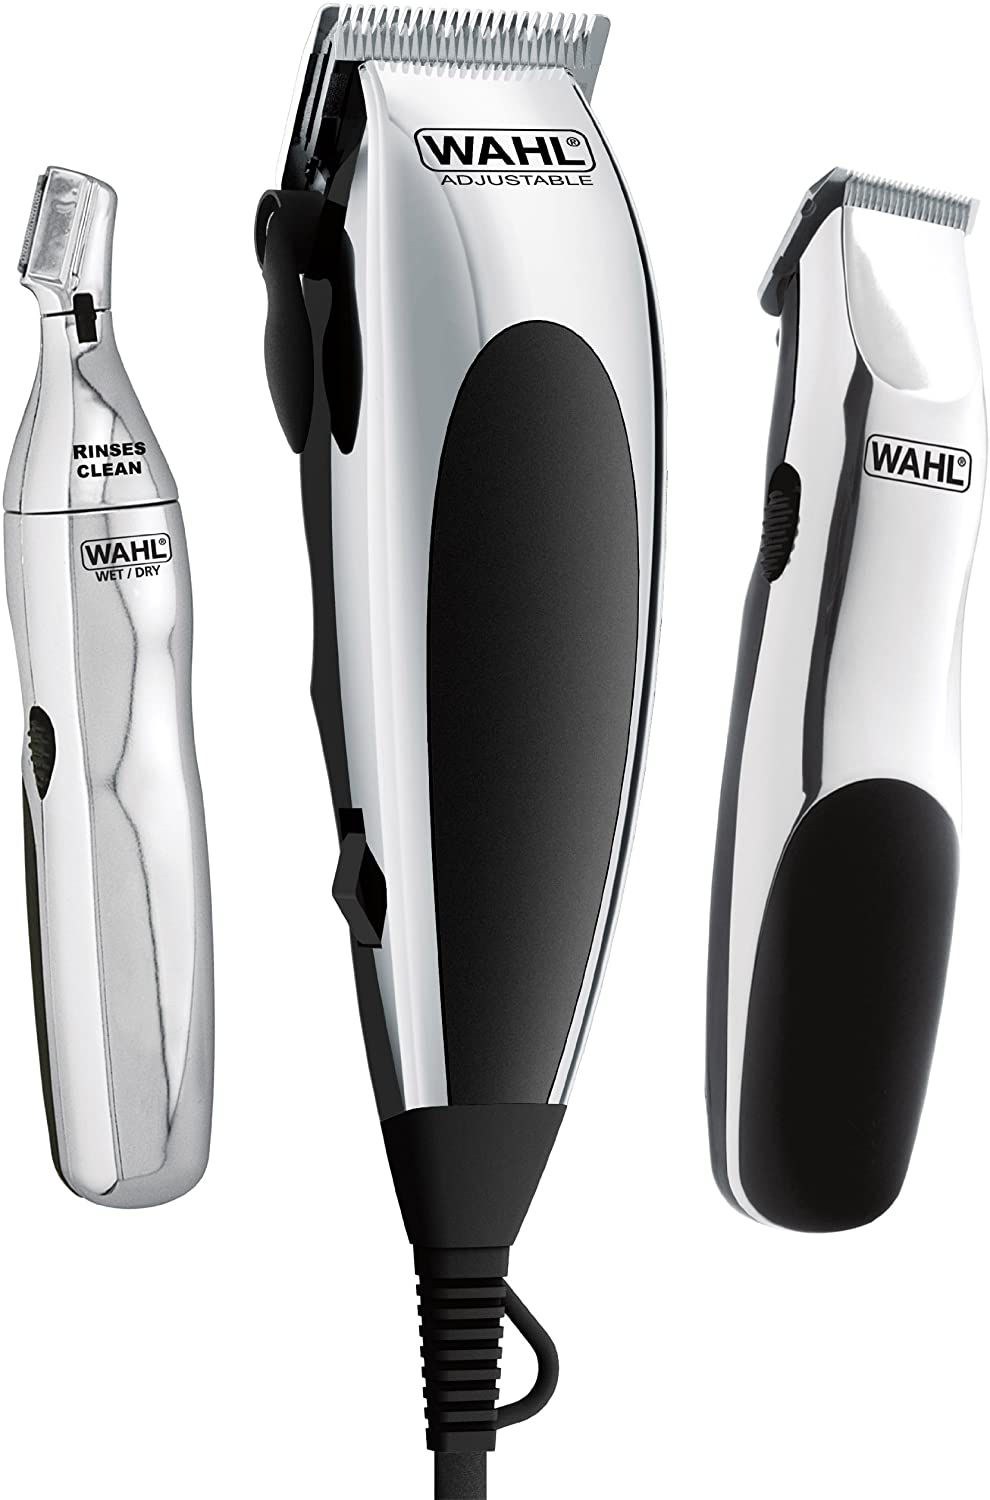 WAHL 30 Piece Complete Barber Kit With Compact Trimmer - 3195